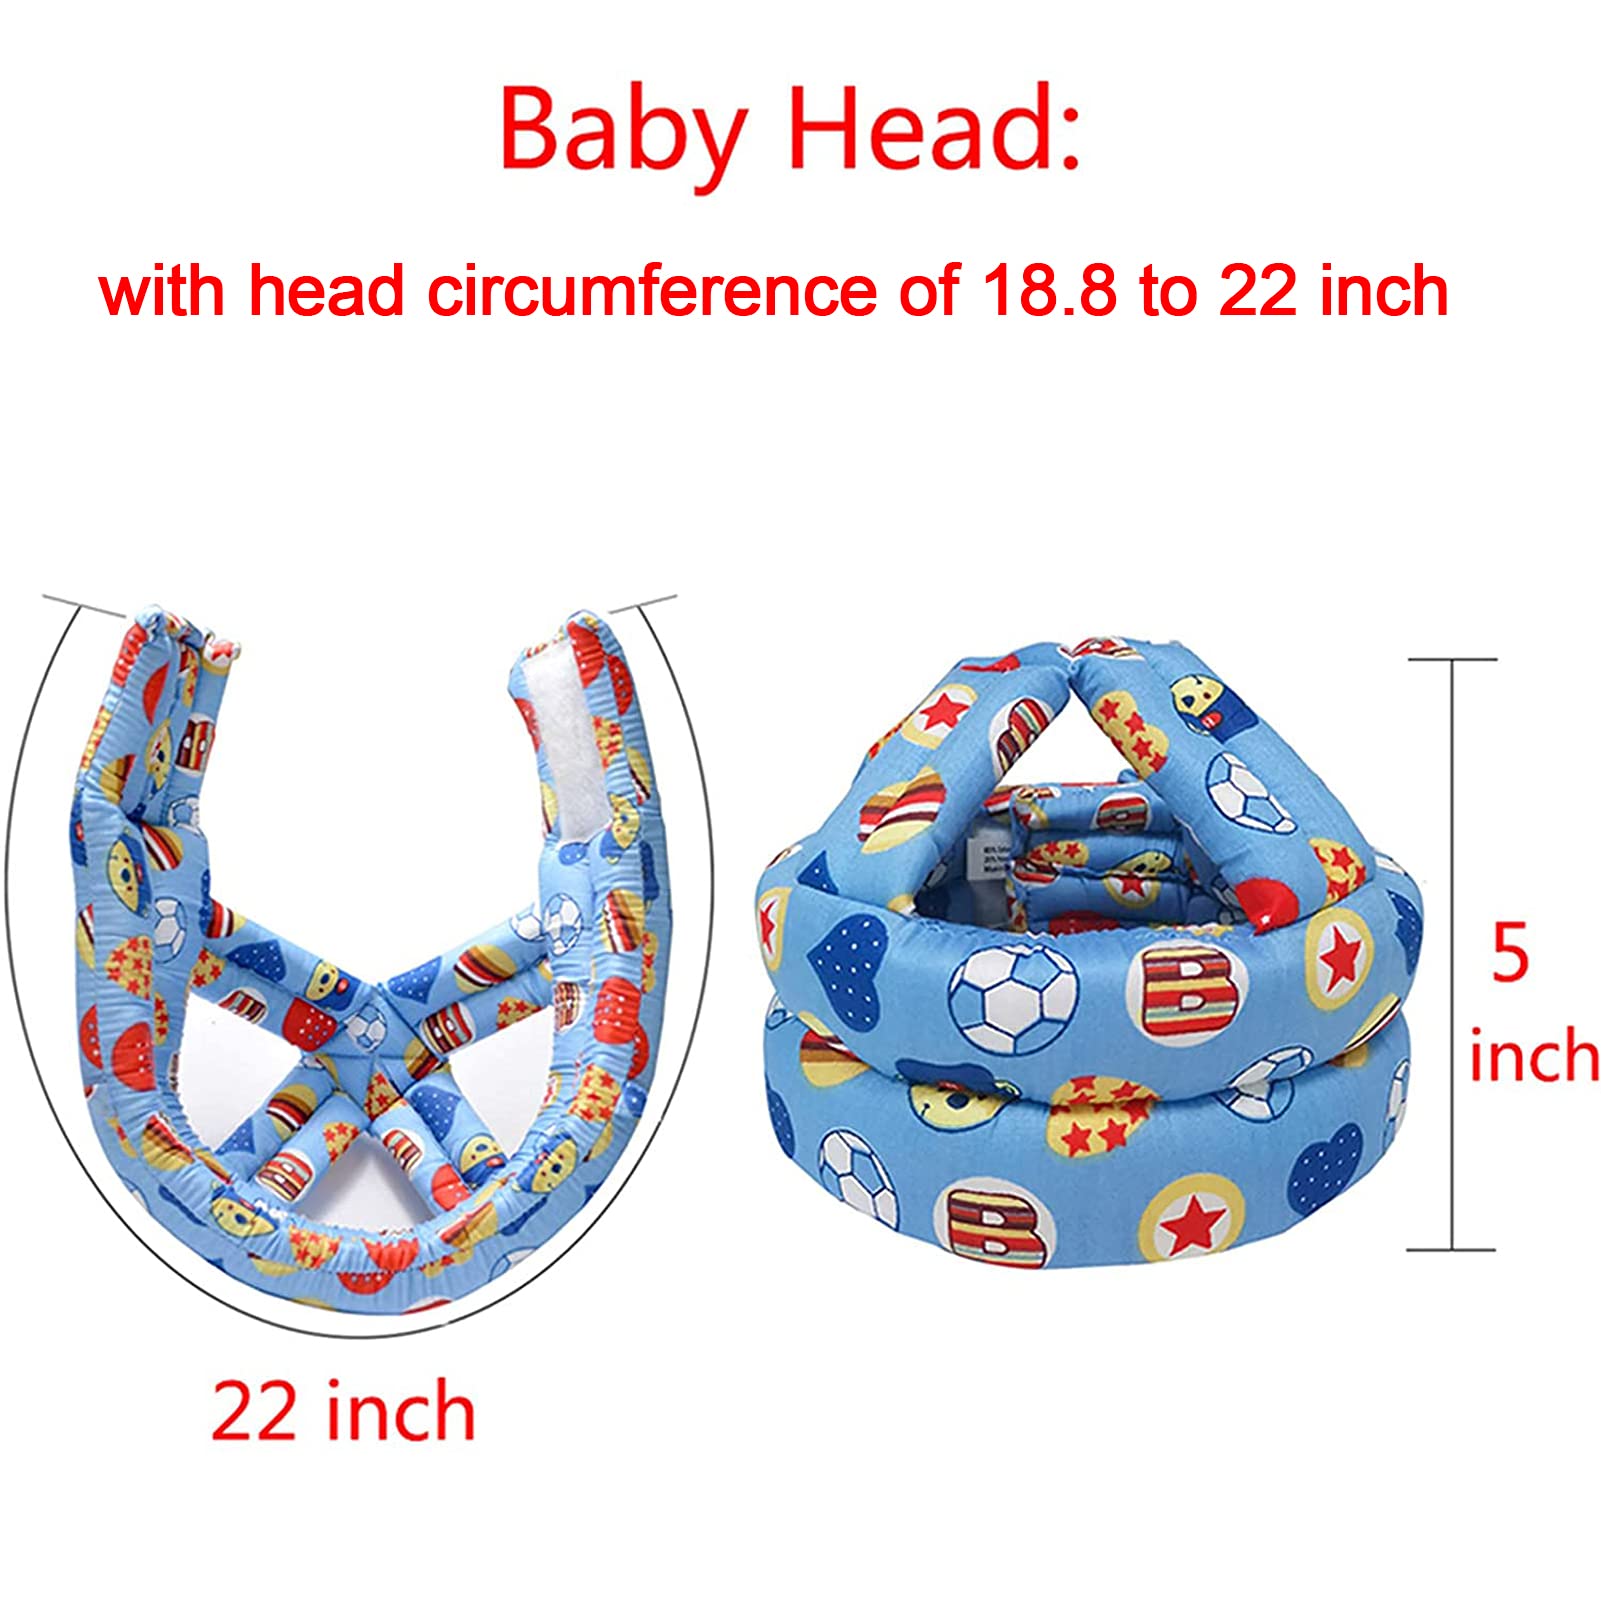 IULONEE Baby Infant Toddler Helmet No Bump Safety Head Cushion Bumper Bonnet Adjustable Protective Cap Child Safety Headguard Hat for Running Walking Crawling Safety Helmet for Kid (Blue Ball)